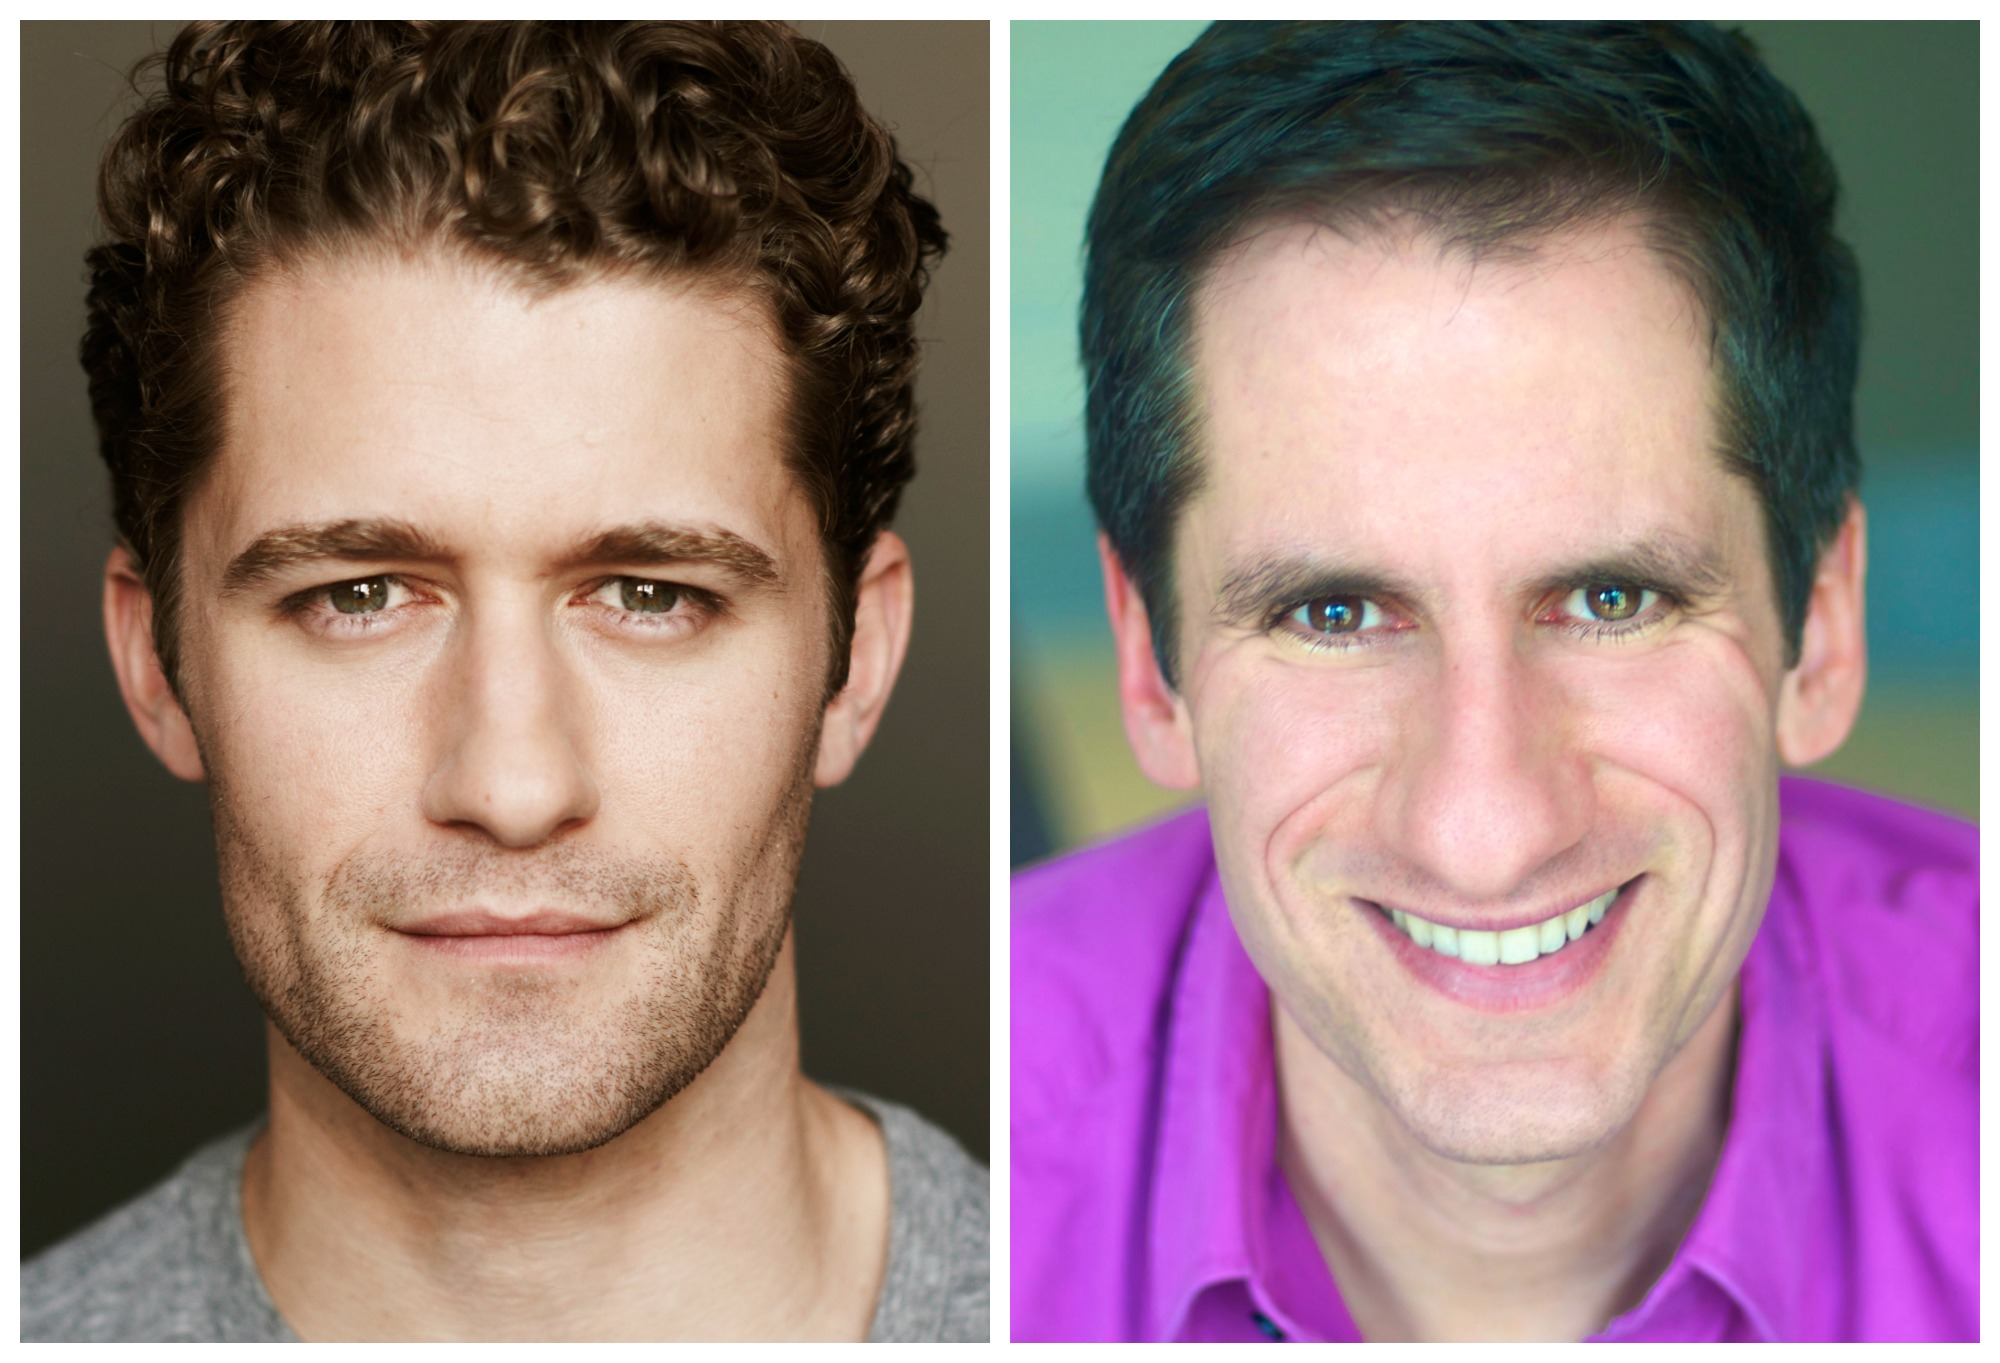 Matthew Morrison and Seth Rudetsky in Ft. Lauderdale Feb. 17'